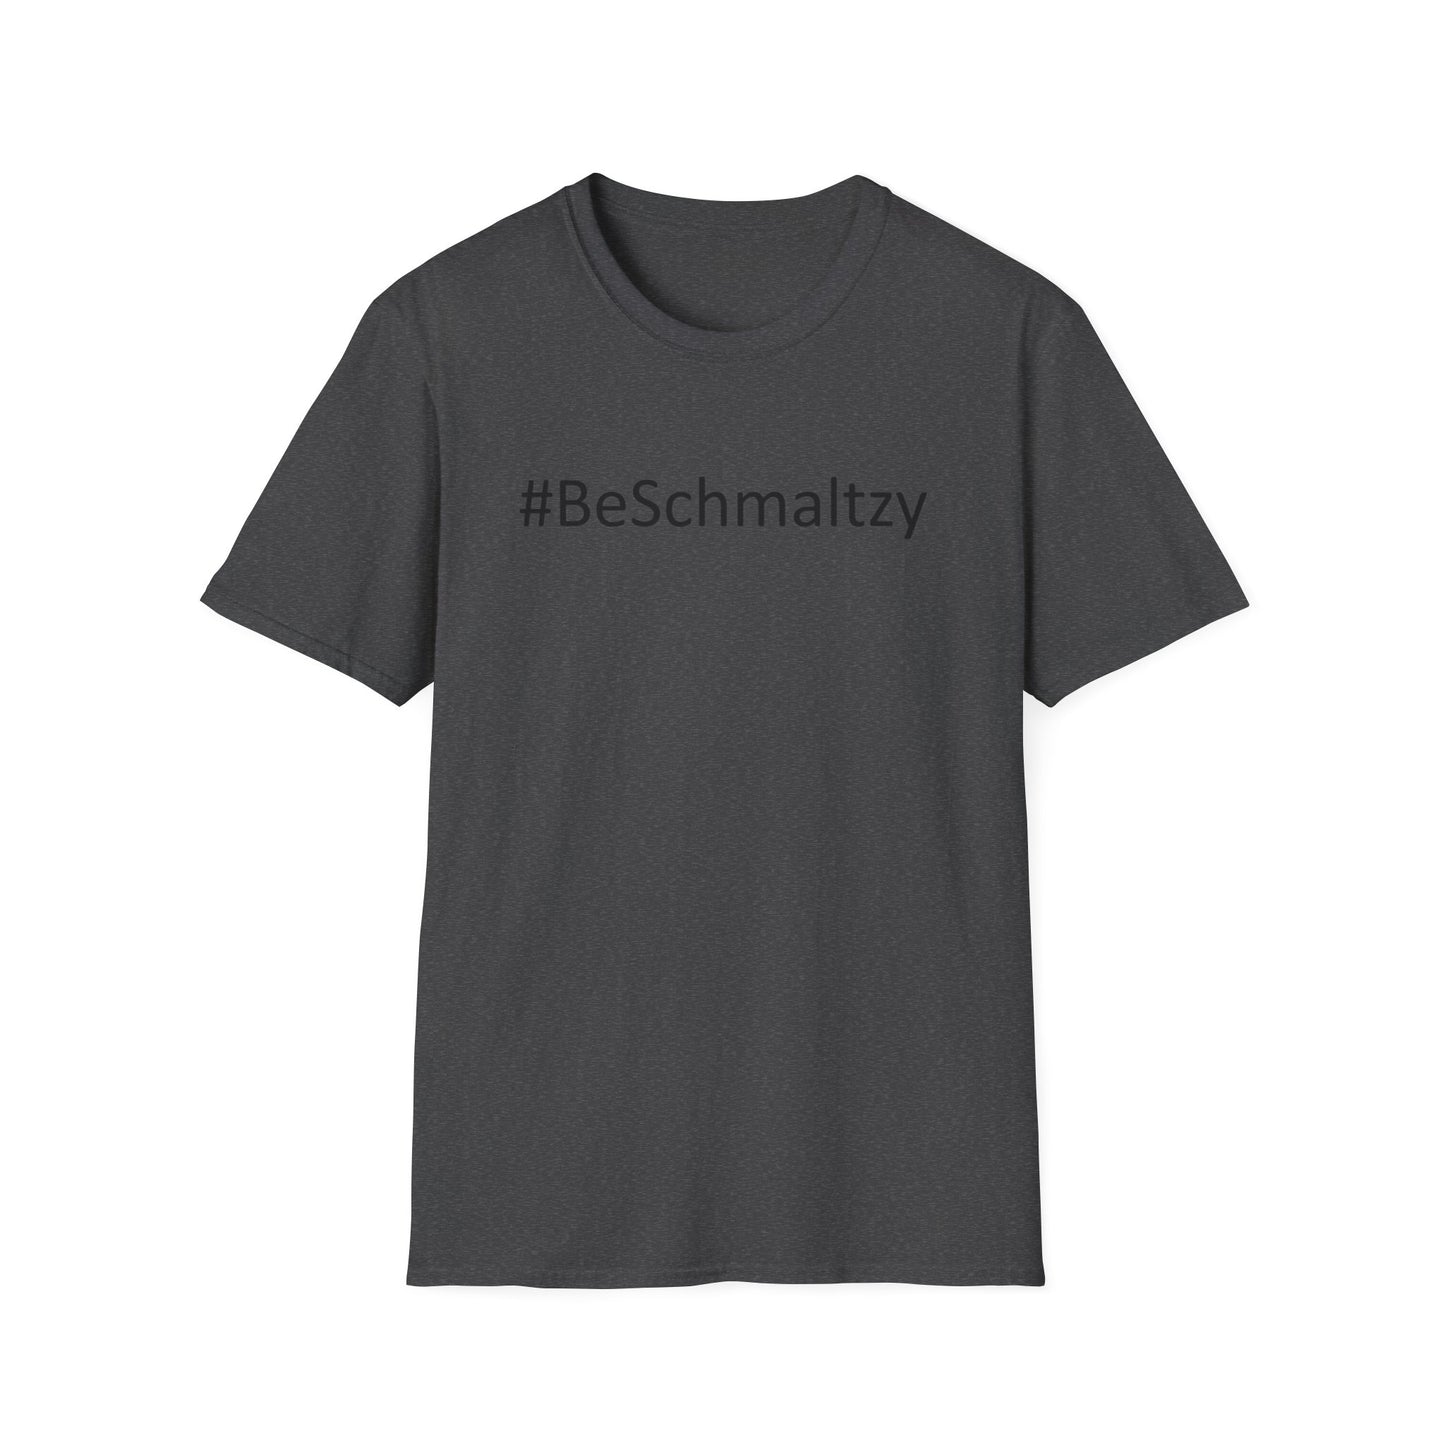 #BeSchmaltzy - Straight Black Letters - Unisex Softstyle T-Shirt - Multiple Colors Available